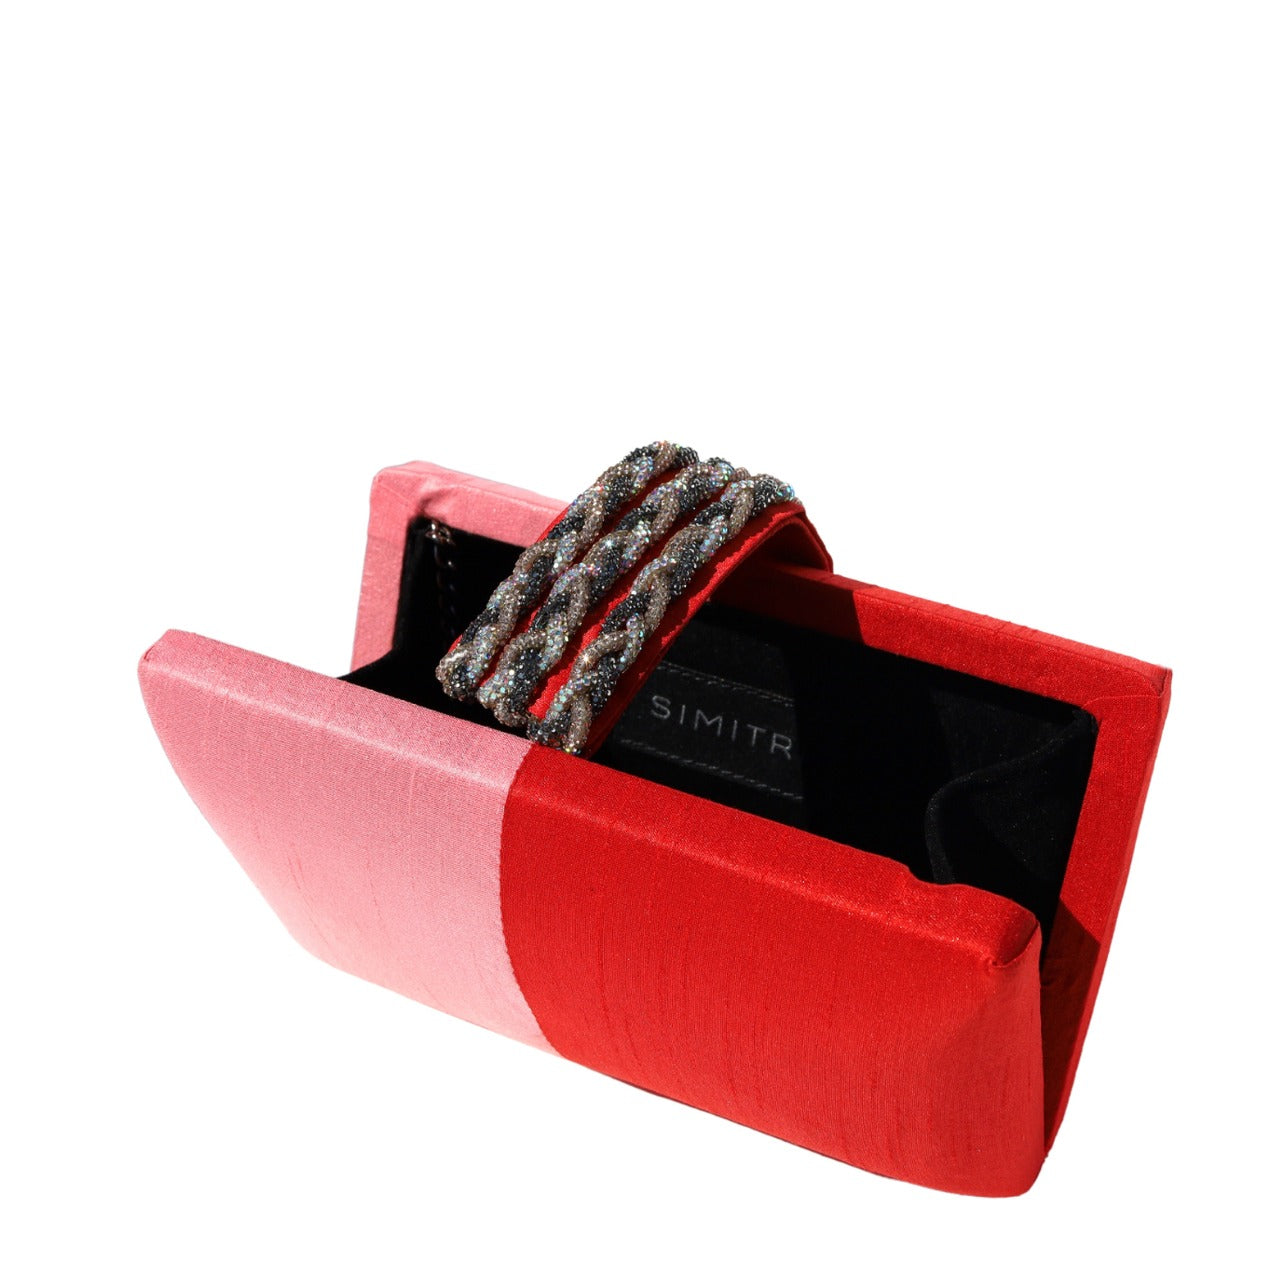 Coral Clutch by Simitri